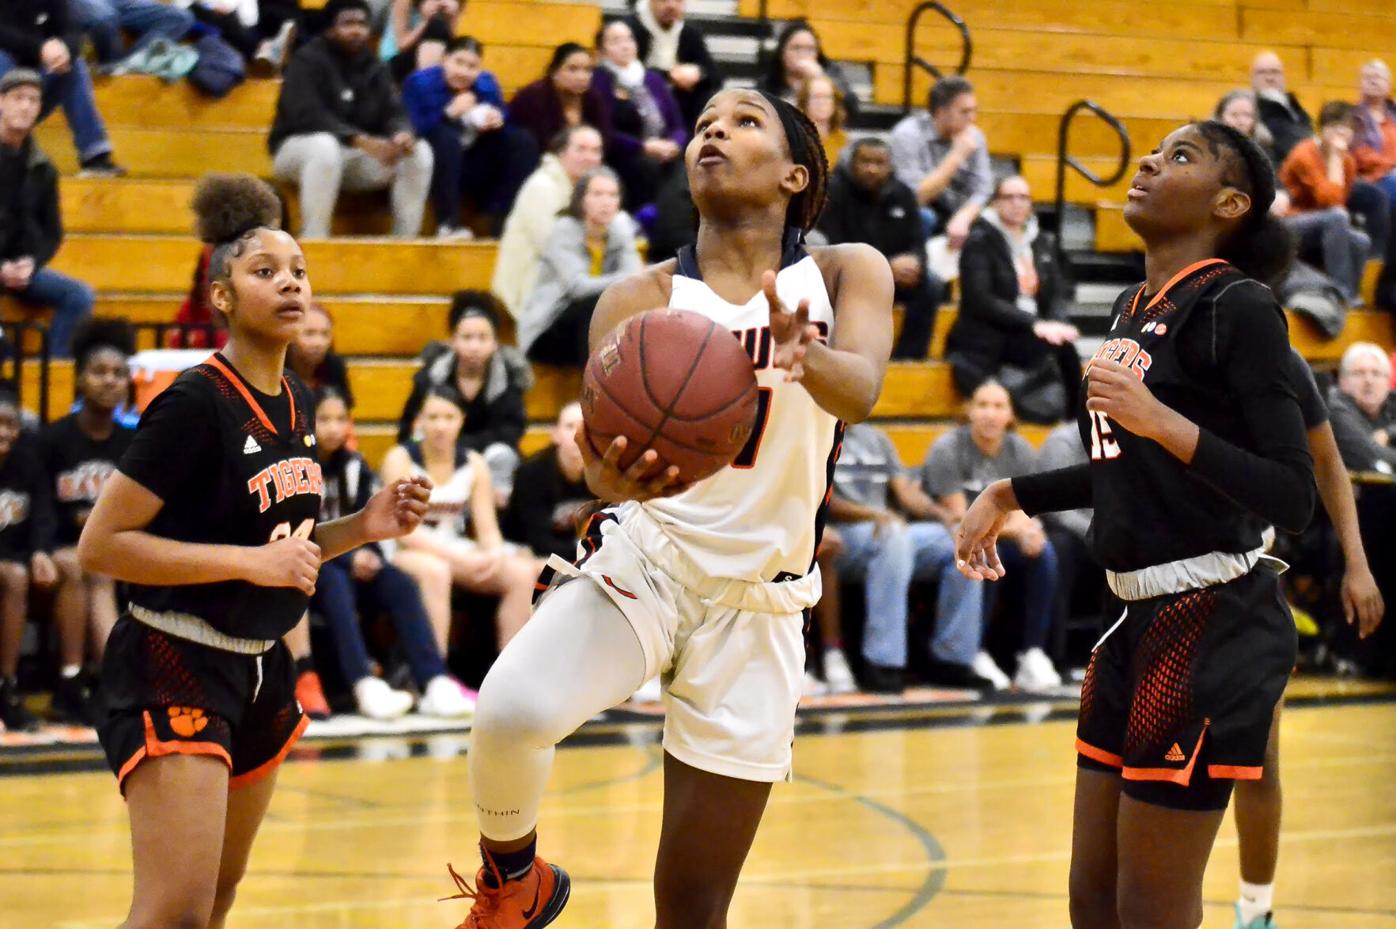 Robbinsdale Cooper girls basketball: Strong core returns to the ...